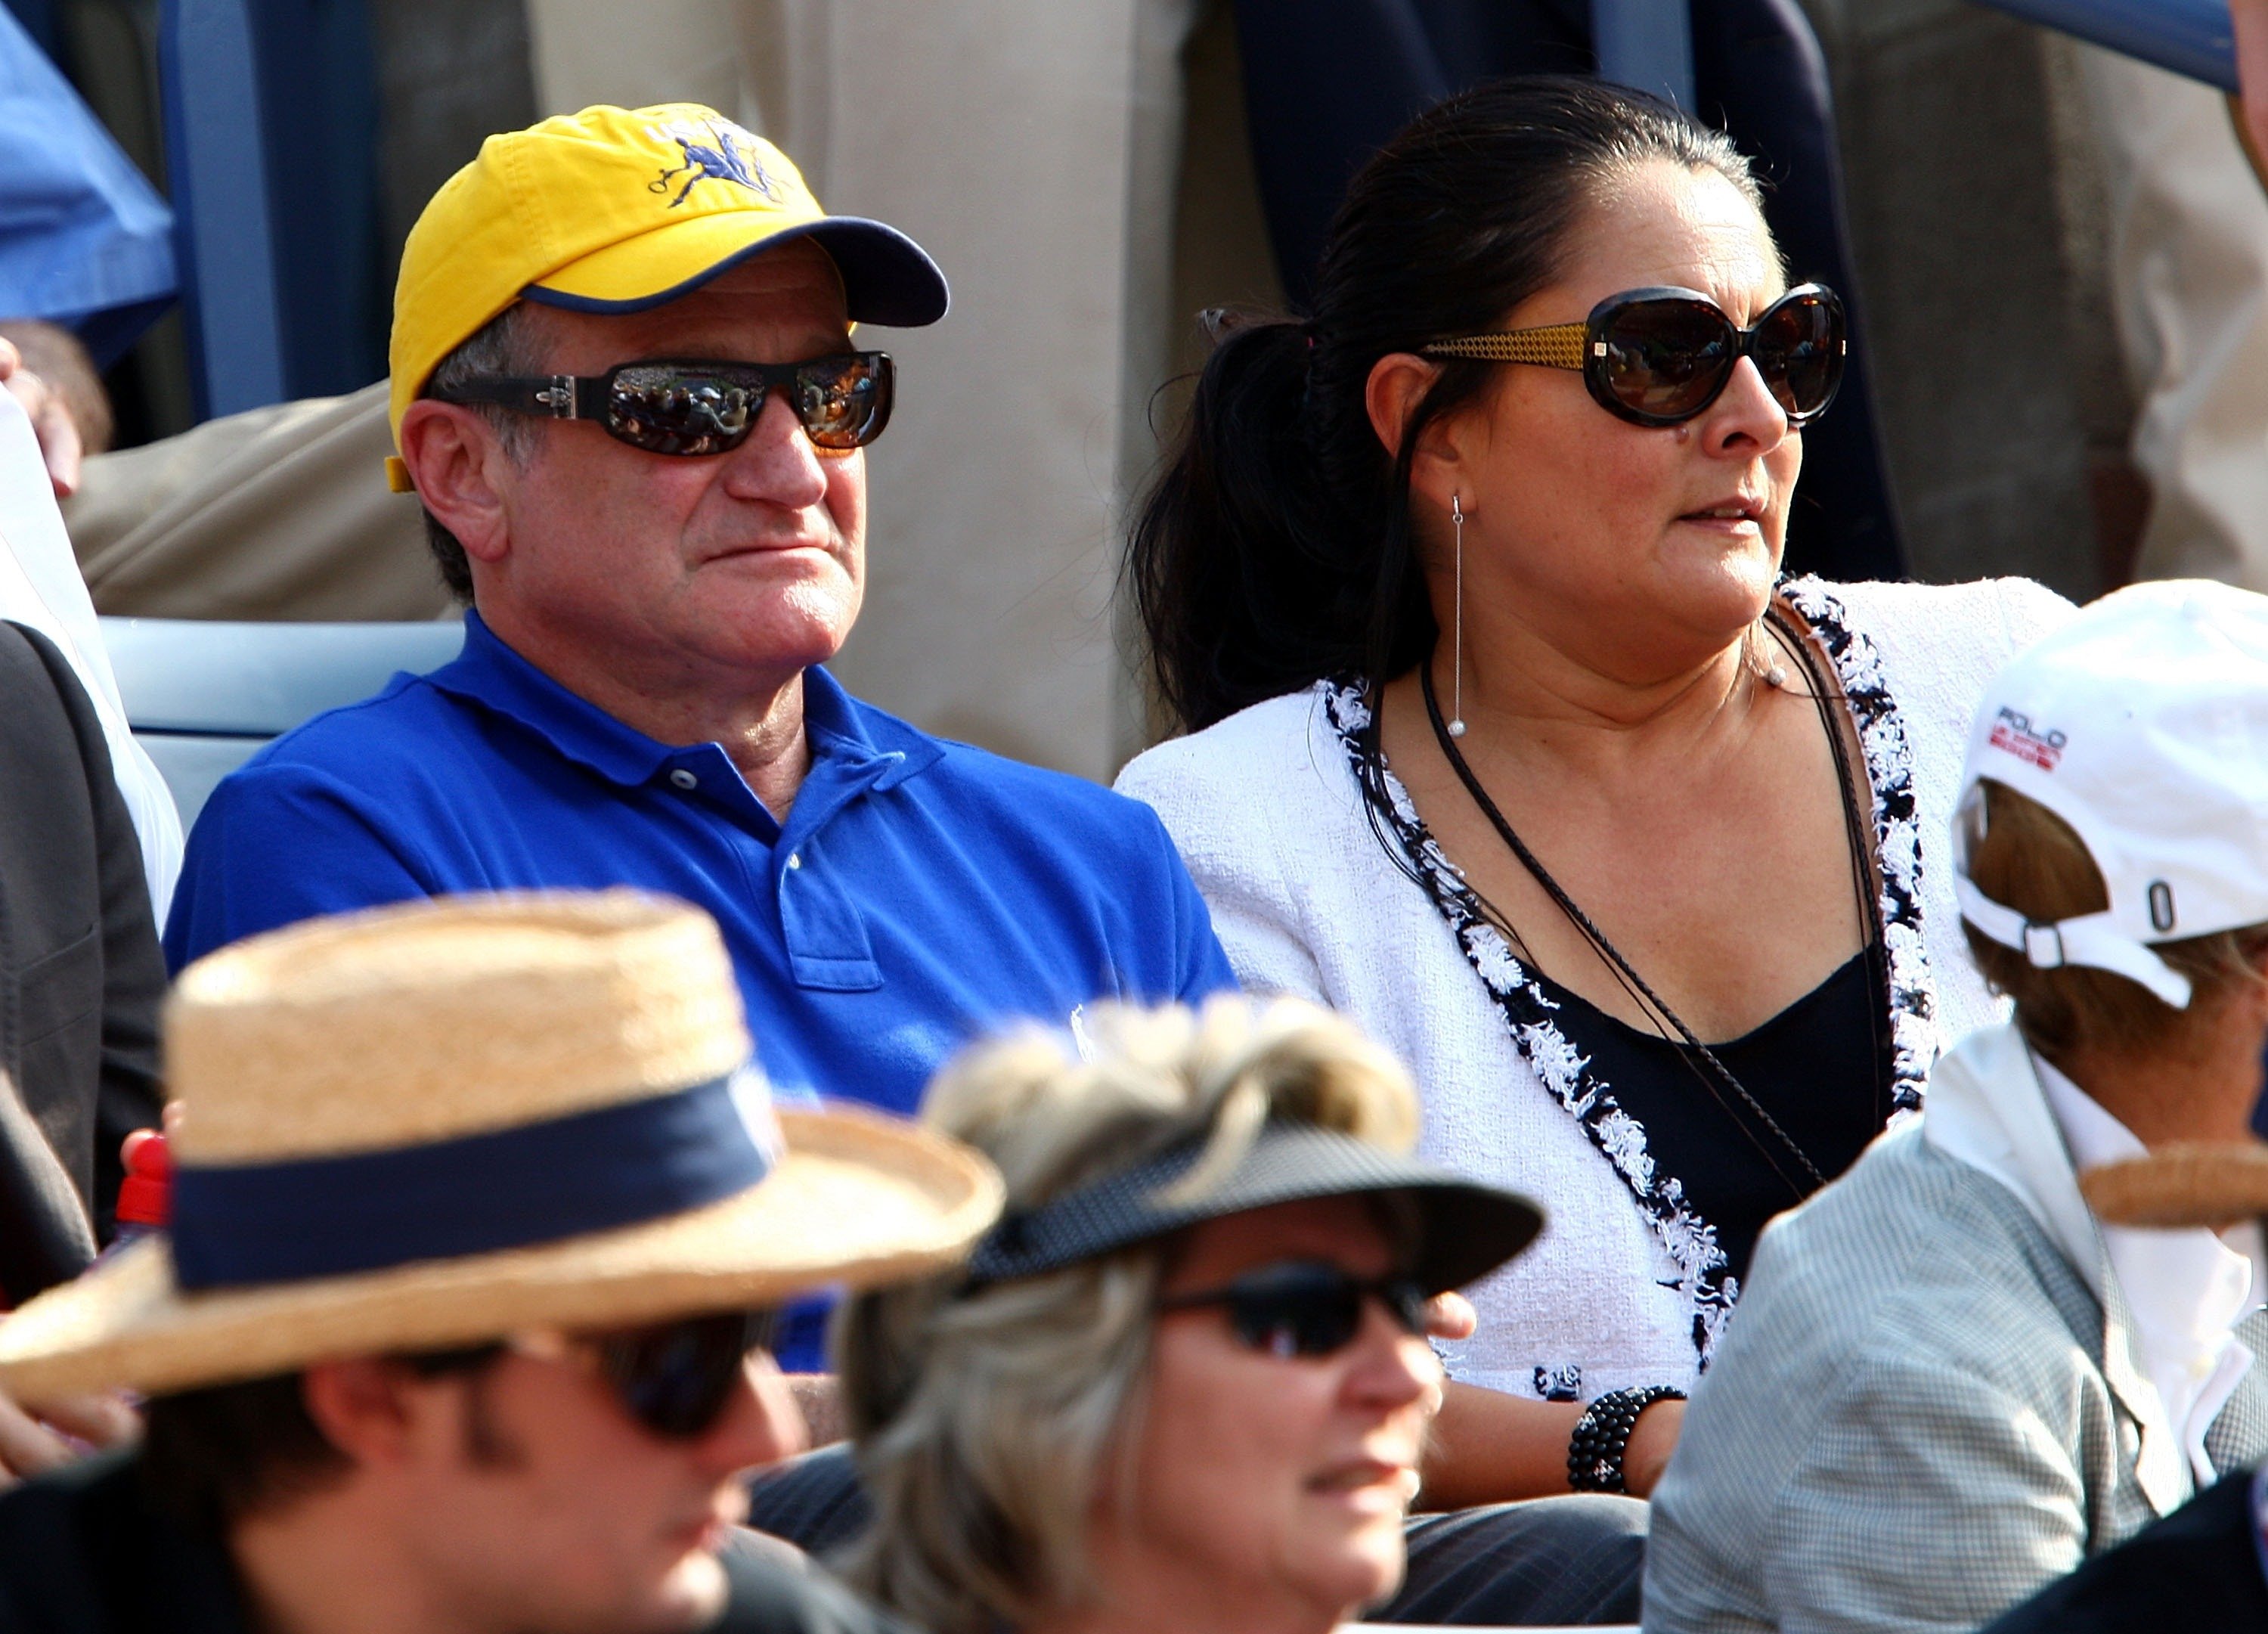 Actor Robin Williams and his wife Marsha Garces Williams attend the  2007 U.S. Open Men's Singles Final in Arthur Ashe Stadium at the Billie Jean King National Tennis Center on September 9, 2007 in New York City | Source: Getty Images